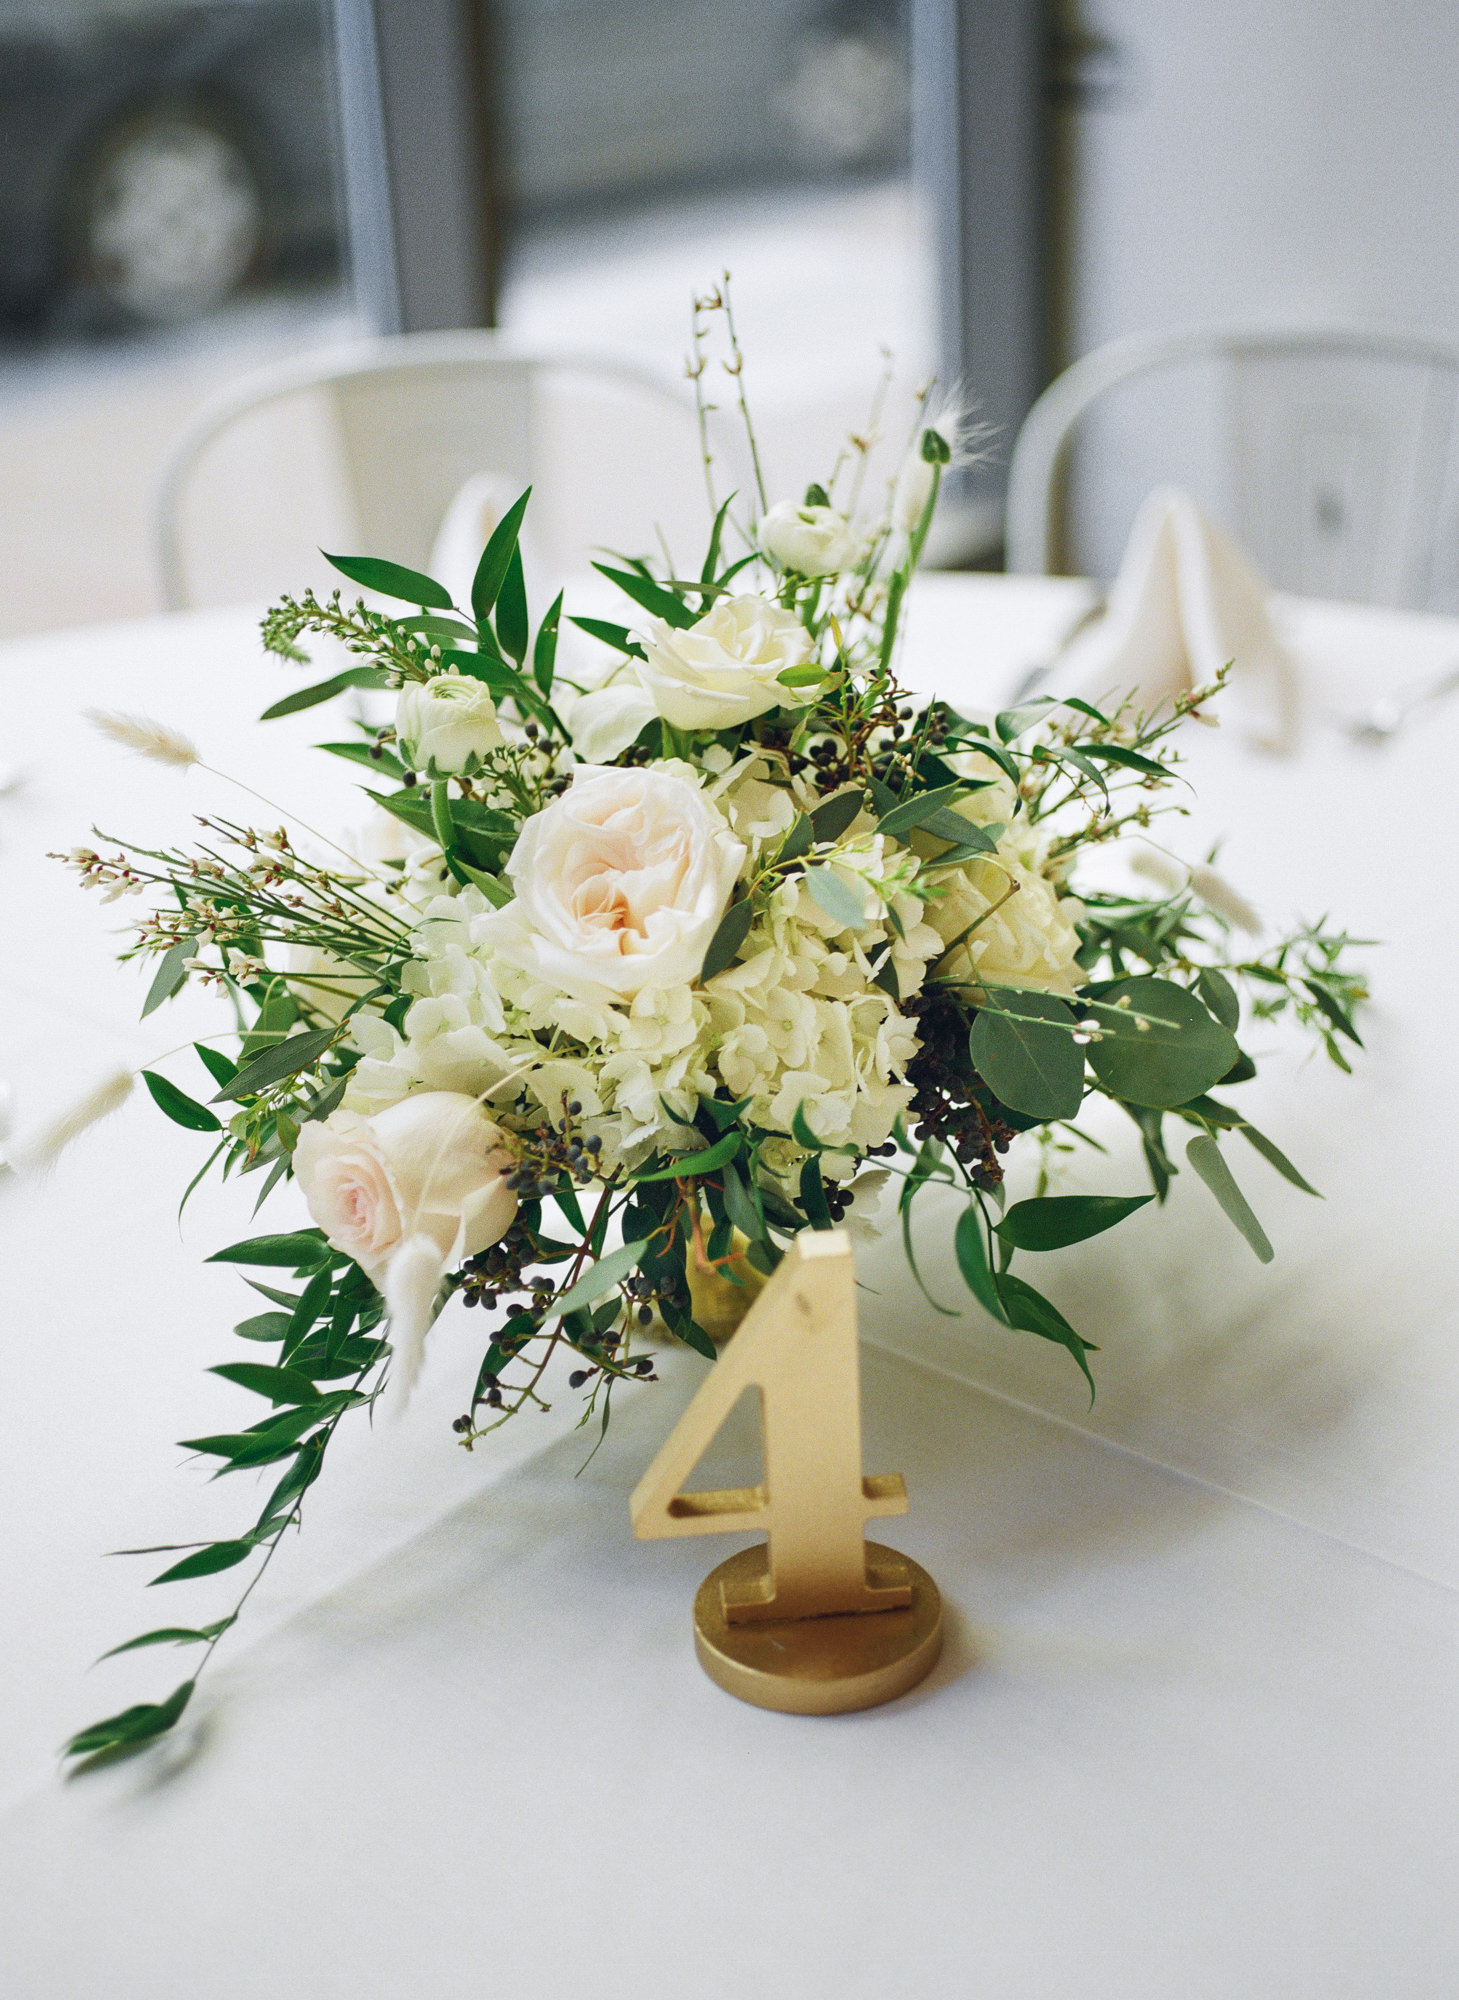 White flowers and gold table number decor at Willow St. Louis wedding reception; St. Louis fine art film wedding photographer Erica Robnett Photography